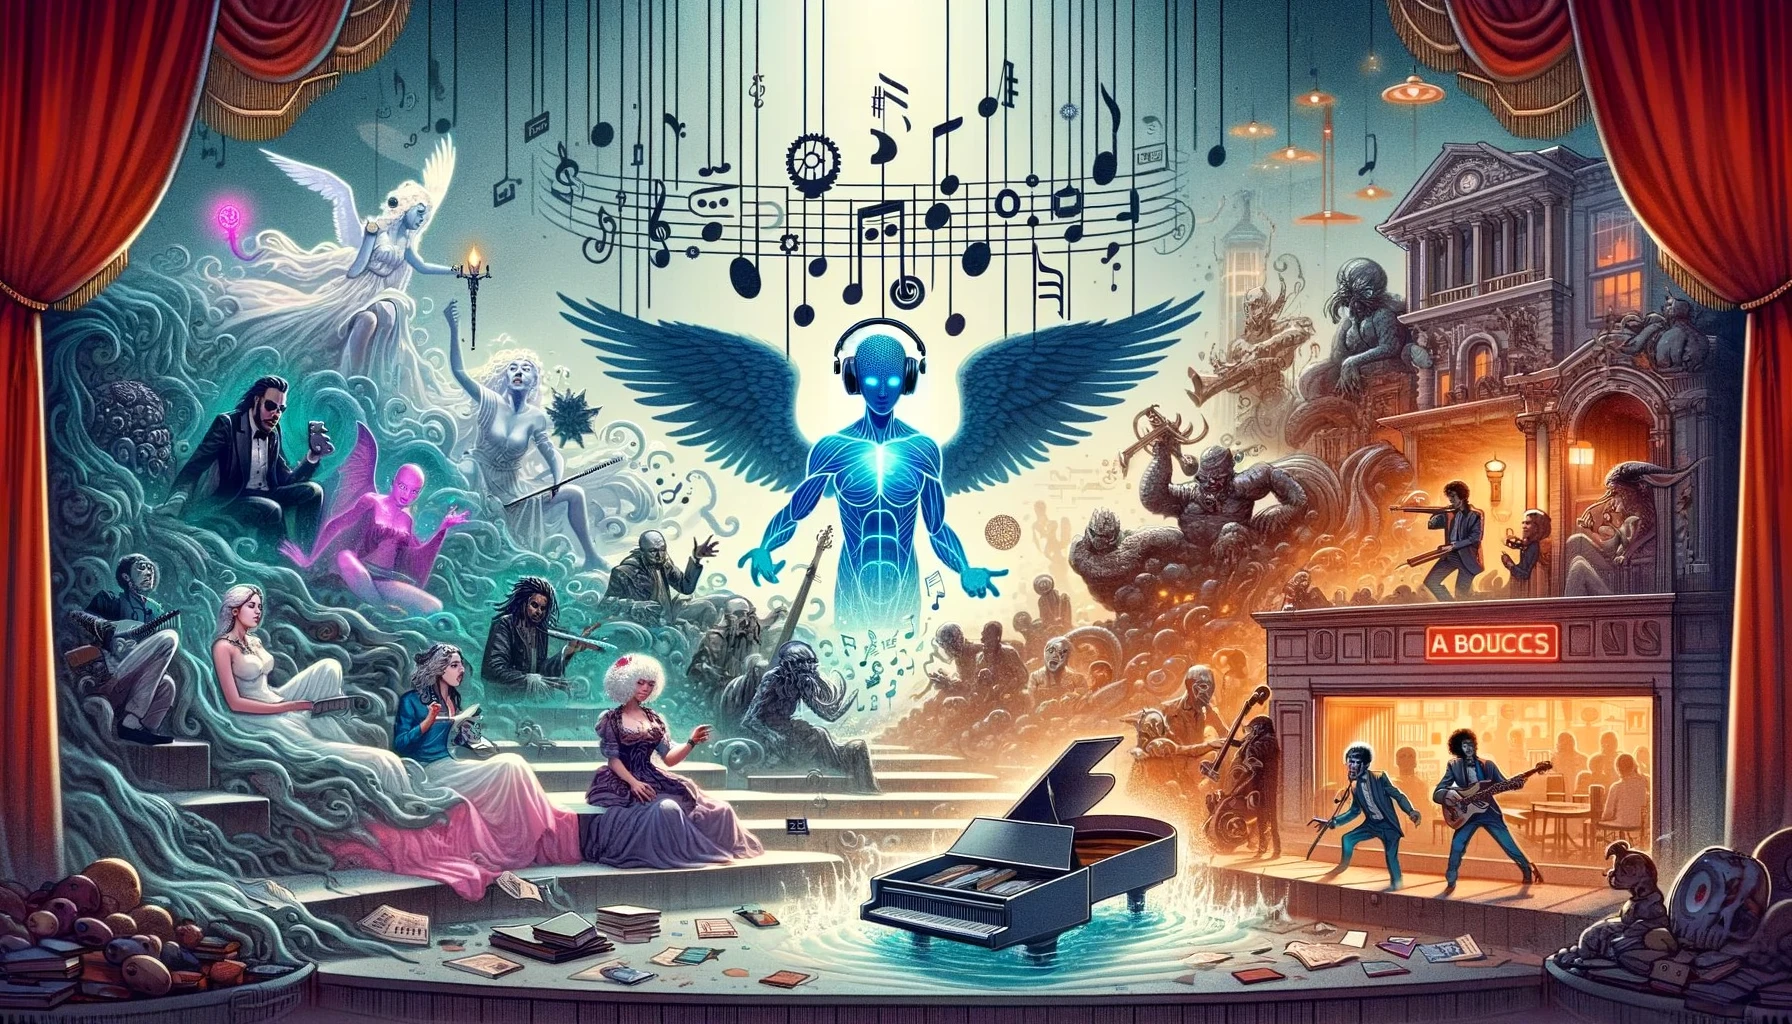 An imaginative depiction of various creative uses of AI for music generation, set against a backdrop of diverse role-playing scenarios. The scene includes a representation of AI in the center, surrounded by visual metaphors for different playlists it generated for various settings: a Planescape campaign in one corner, a Call of Cthulhu one-shot in another, and a trendy bar in San Francisco. Each area is visually distinct, capturing the unique atmosphere of each setting. Planescape features angels and devils in a surreal cityscape, Call of Cthulhu shows eerie, Lovecraftian elements, and the bar scene is modern and lively. Musical notes and symbols are scattered throughout the image, symbolizing the AI's role in creating diverse playlists for these different narratives.